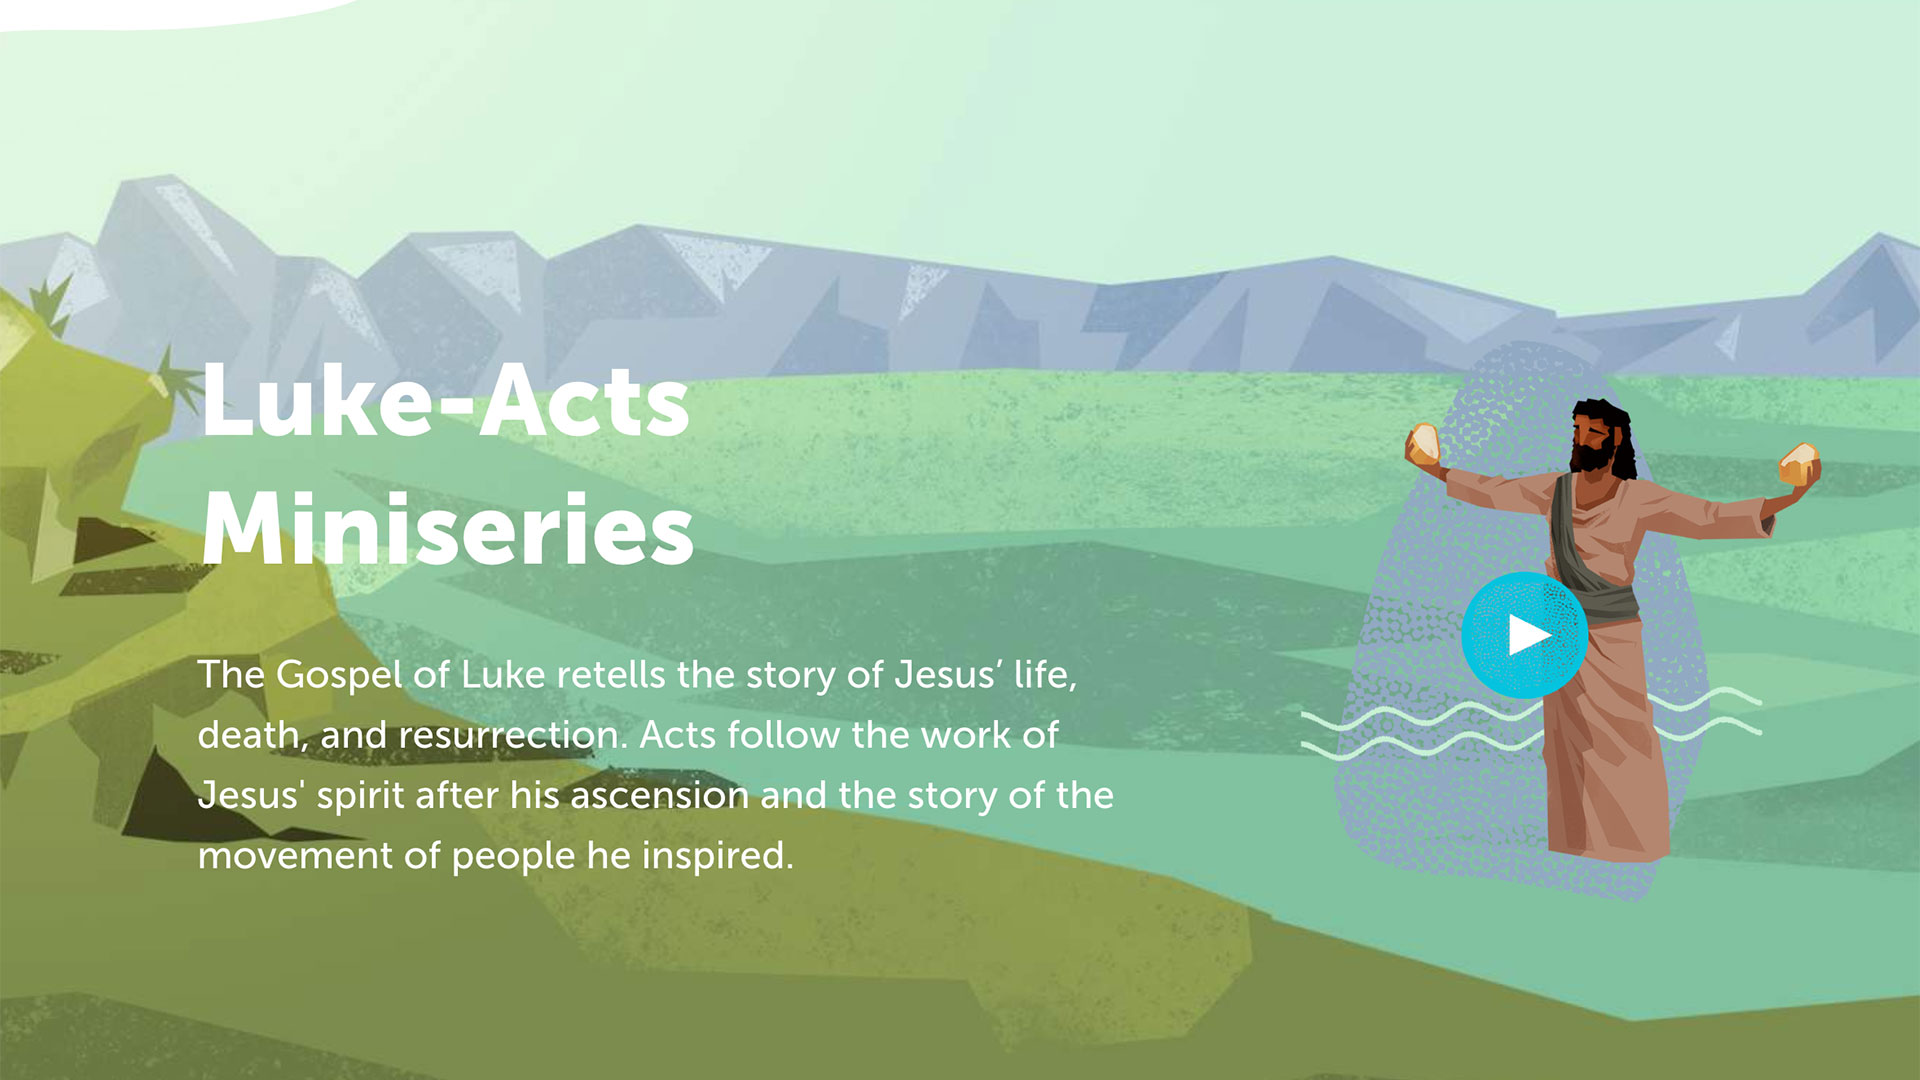 The Luke-Acts Miniseries, videos from The Bible Project